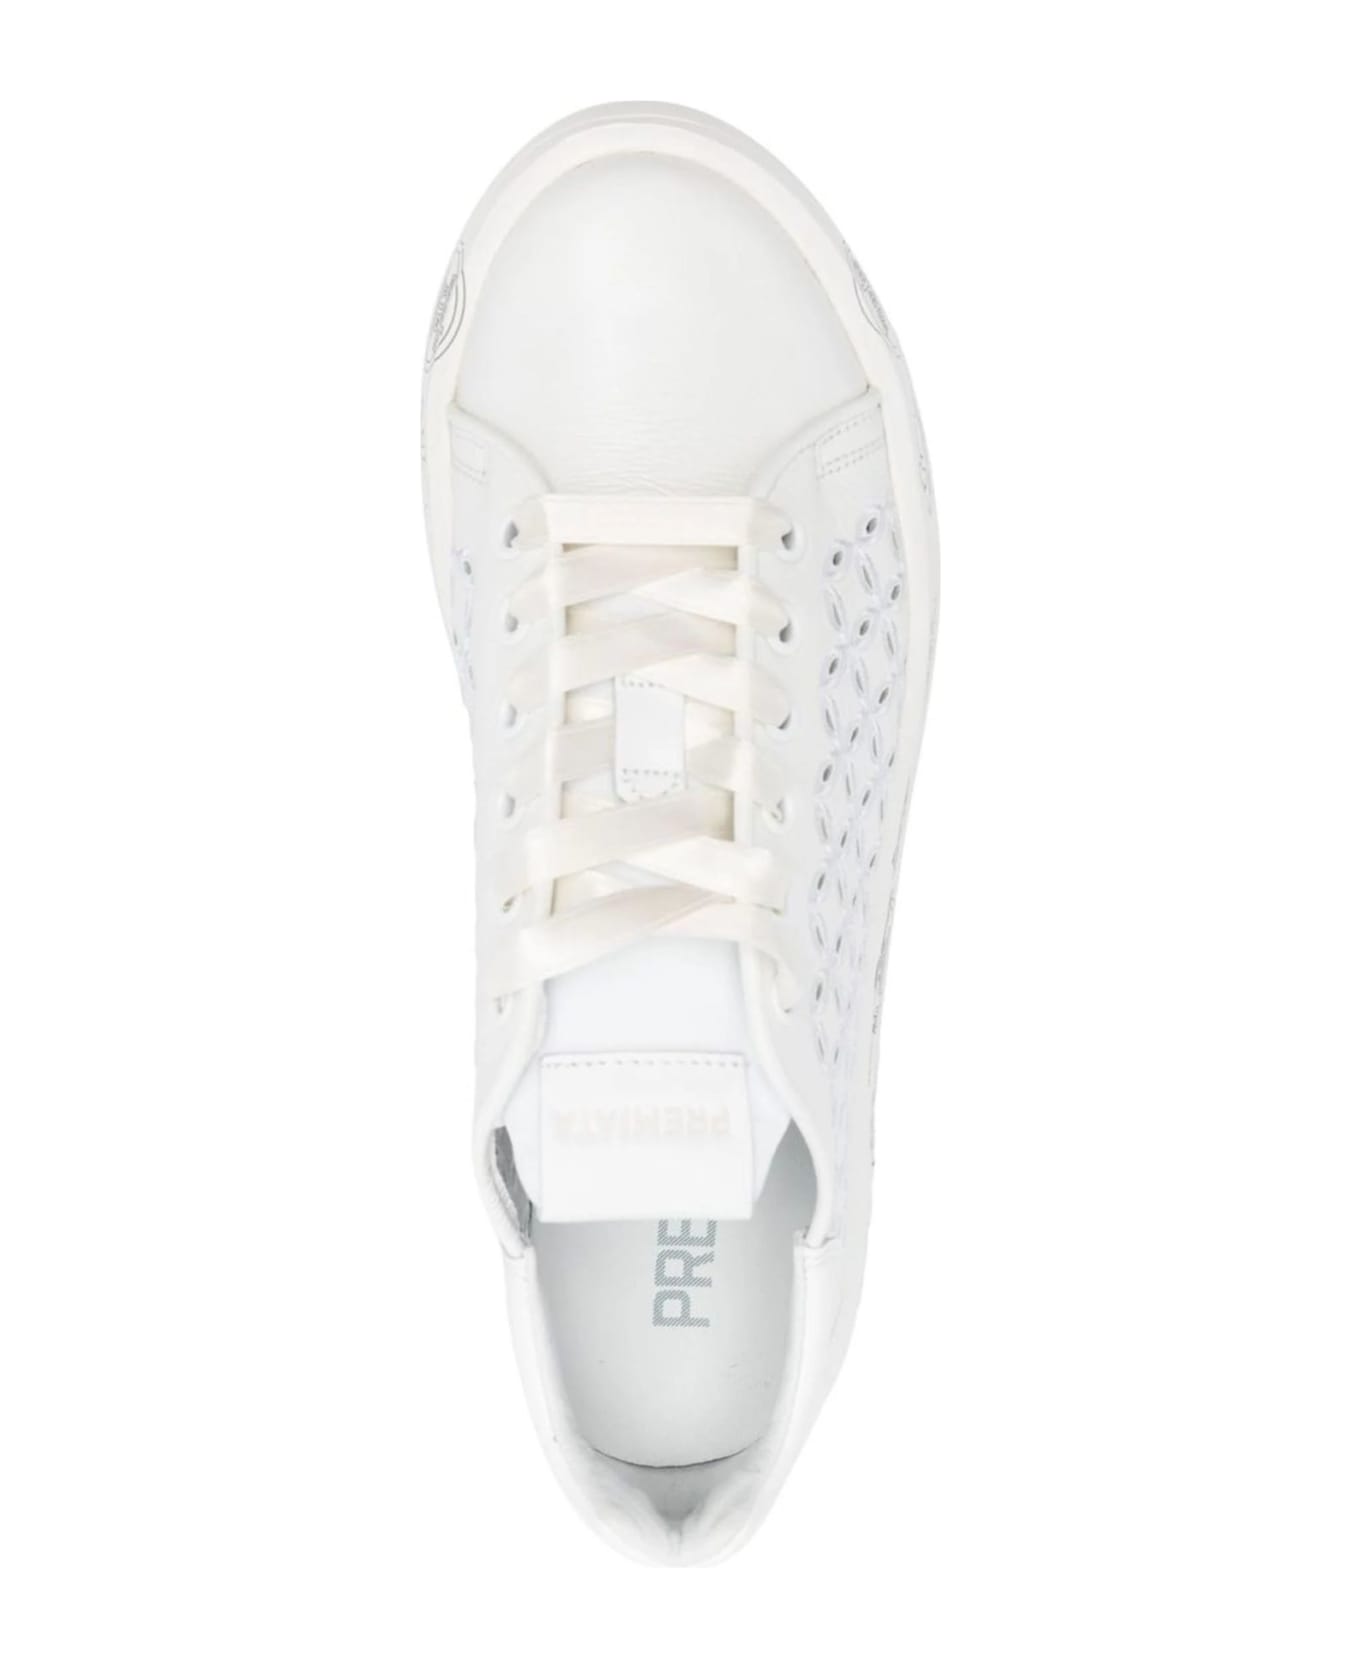 Premiata Belle Lace-up White Leather Sneakers - White